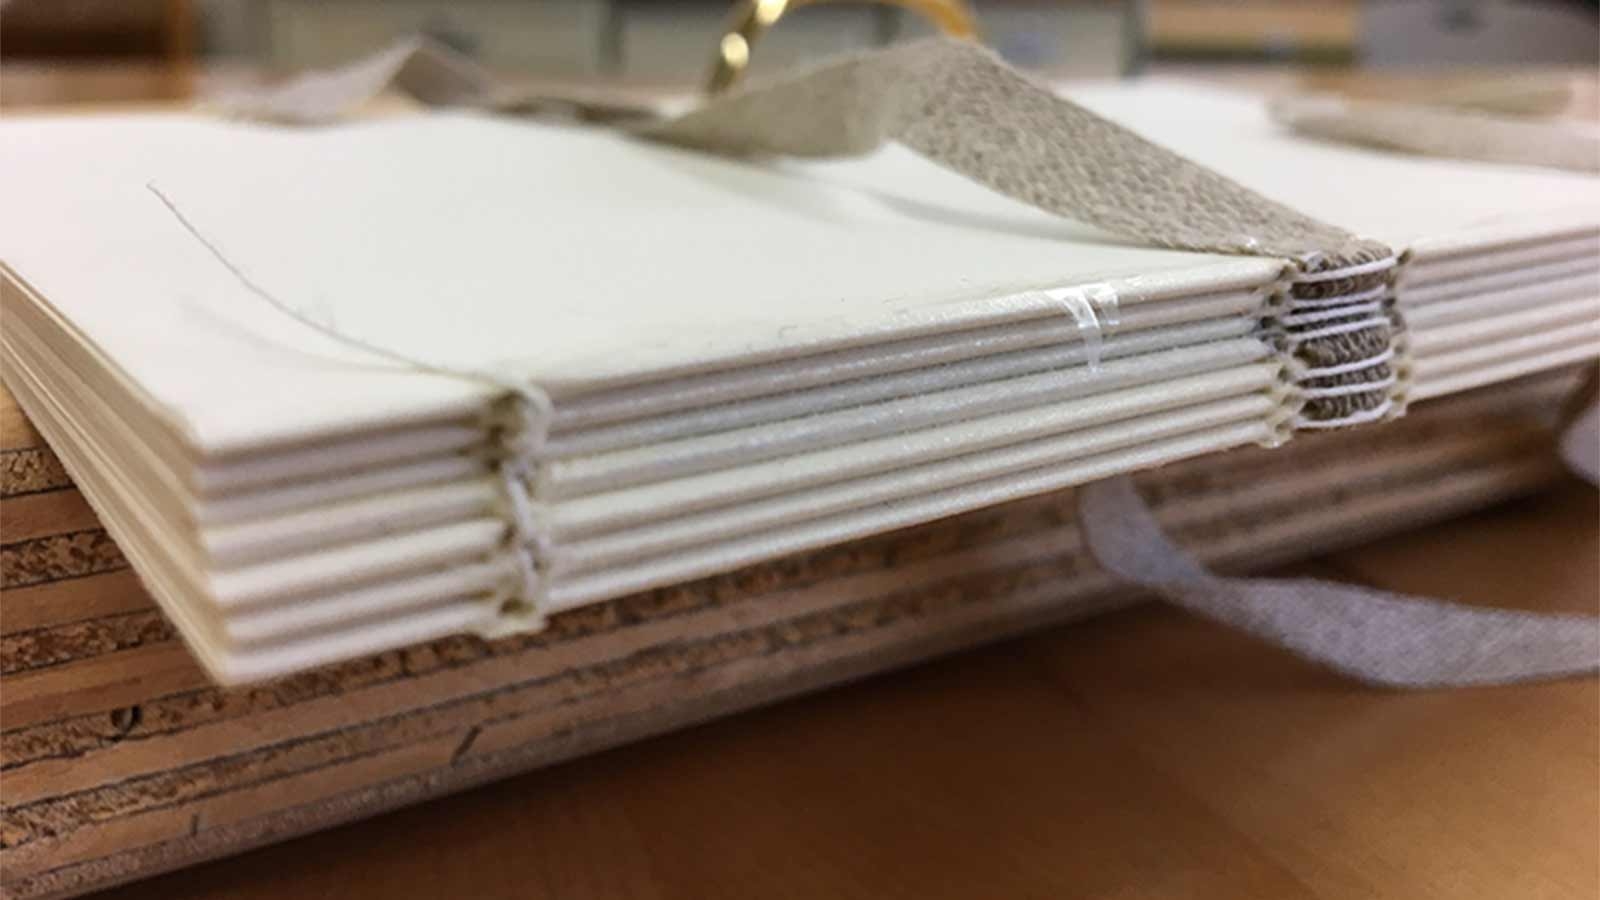 Sewing the spine of the book together!